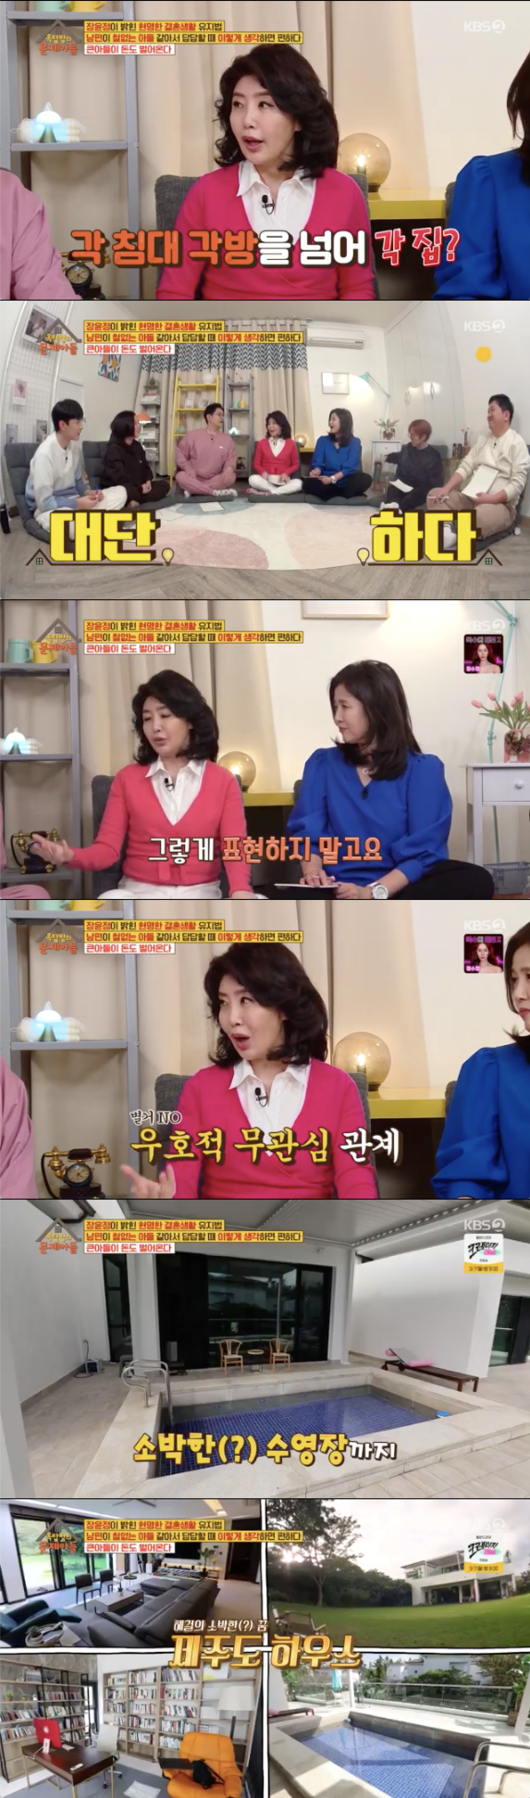 Problem Child in House Yeo Esther said that the annual sales of the nutritional product business are 100 billion won.In the KBS 2TV entertainment program Problem Child in House broadcasted on the afternoon of the 22nd, Yeo Esther, a preventive medicine doctor, and Kim So-hyung, a oriental medicine doctor, appeared as medical collaborer who has not seen anywhere.Yeo Esther introduced her as Yeo Esther, a doctor of preventive medicine, and Kim So-hyung said, It is Dr. Kim So-hyung, a doctor of oriental medicine.Kim Yong-man was surprised at the unfamiliar chemistry, saying, This combination is the first.Mr. Kim is a woman who causes my jealousy, and she came here twenty years ago excited about her husbands medical program.I came here excitedly saying, Im going to host a doctor and MC from Miss Korea. He laughed with anger.Kim So-hyung once appeared in a program like Kim Yong-man, and Kim So-hyung expressed his pleasure by saying, I only believed Kim Yong-man today.Im not proud of it, said Yeo Esther, whose annual sales of the nutritional product business are now close to 100 billion won.I brought all the lactic acid bacteria and all the envelopes, he said, laughing.As for the reaction to Hong Hye-geol, Yeo Esther said, I have been thinking about where my husbands bad rumors came from.I will say a lot of good things about my husband in the future. Kim So-hyung pecks at the king-sized bed. Kim So-hyung said, I feel uncomfortable using the same bed (with my husband) when Im older.My husbands reaction was surprisingly good, he said.Then I split the king-sized bed into singles, and my husband said he was very comfortable, Kim said.Yeo Esther writes each house over each bed, each room, and Yeo Esther laughs, explaining that it is a friendship indifference relationship.My husbands romance lives in Jeju Island, said Yeo Esther, and when I look at his eyes, I feel stressed.When youre in menopause, youre hurt by your eyes, he said, explaining why he separated the house.Capture Problem Child in House broadcast screen